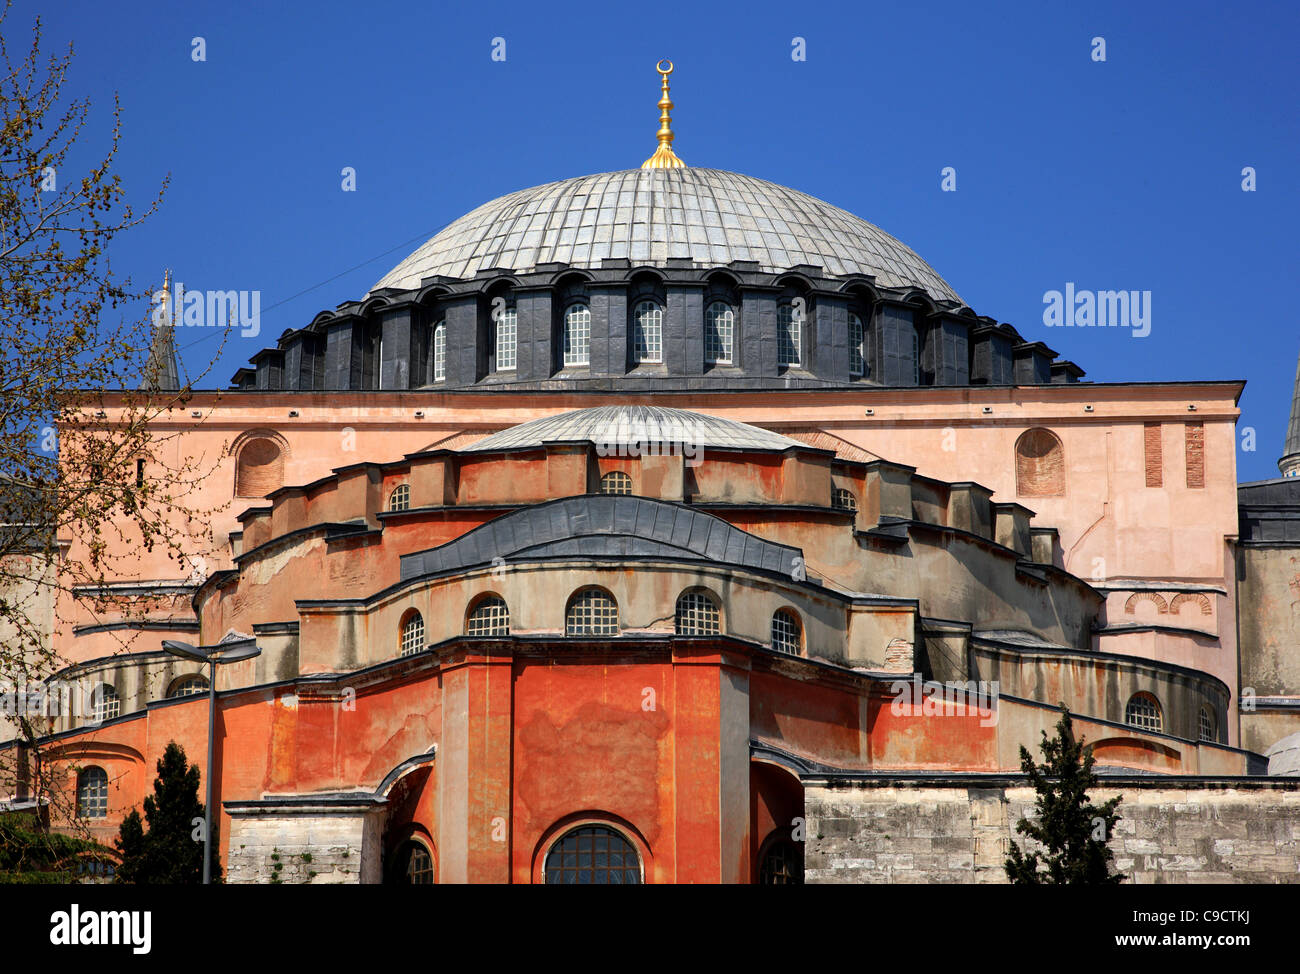 'Detail' from Hagia Sophia and its majestic dome, Istanbul, Turkey. Stock Photo